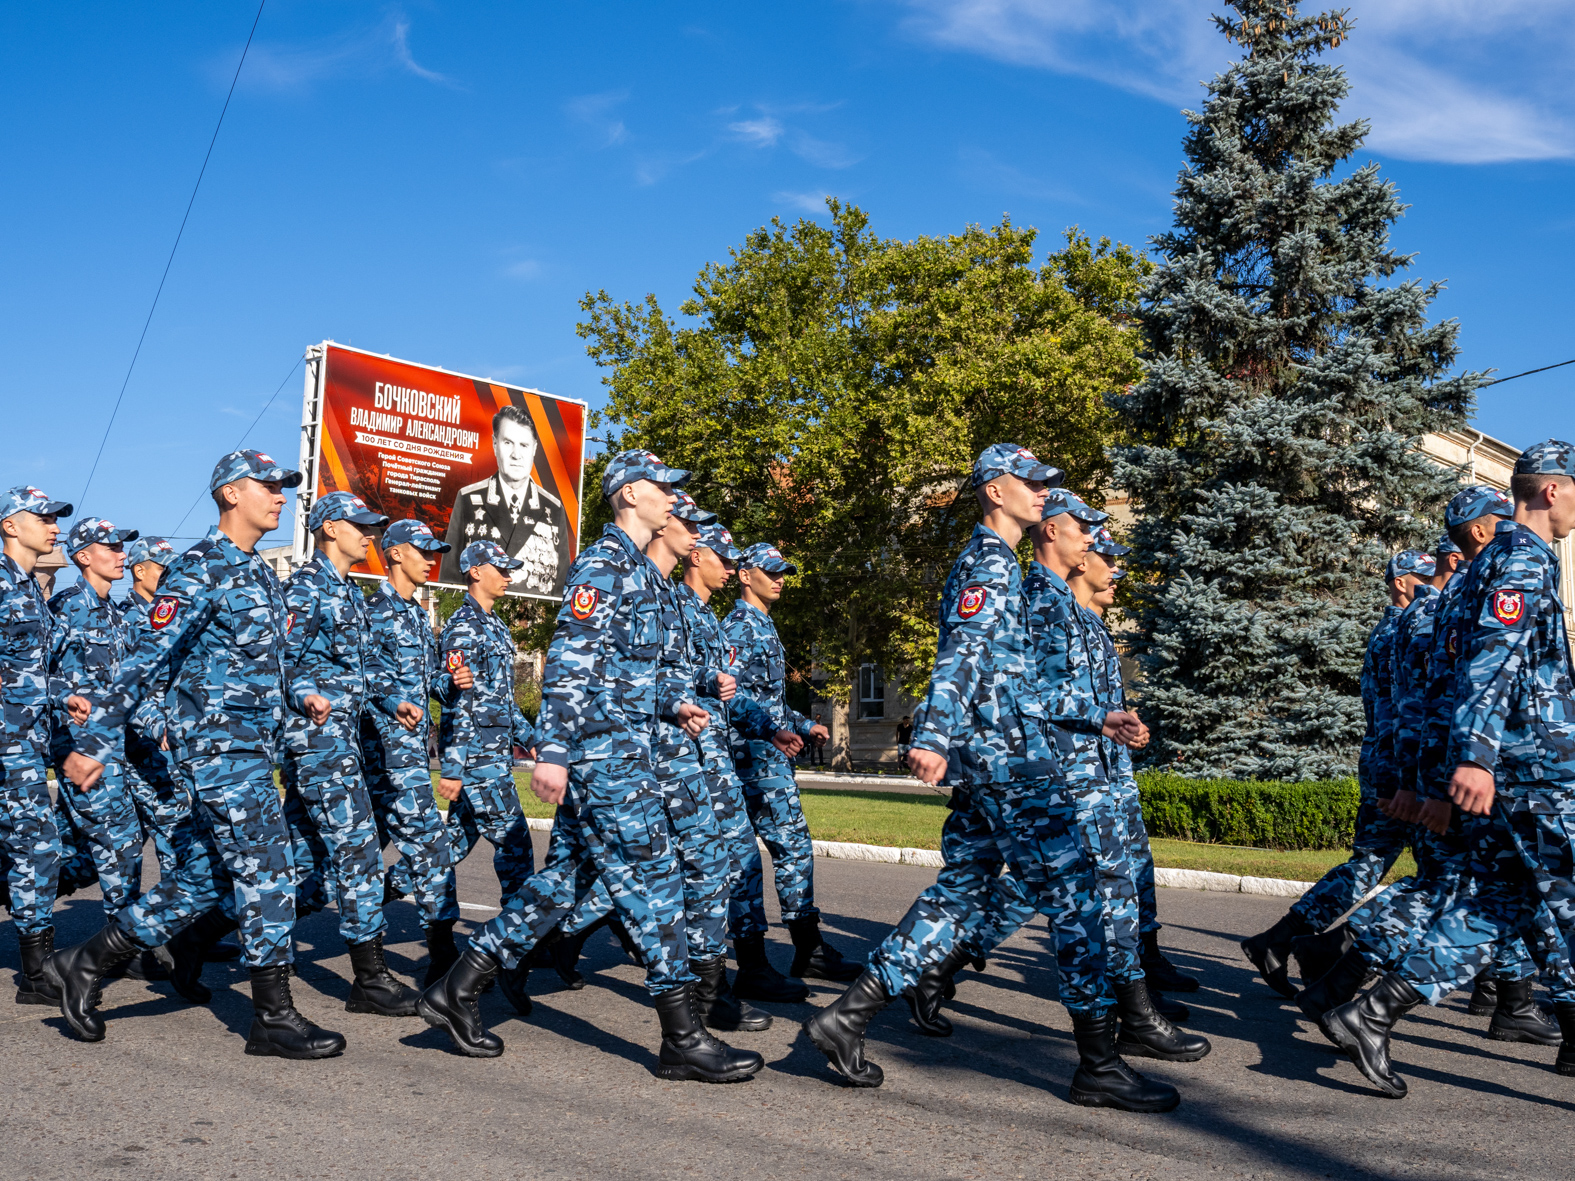 TIRASPOL, TRANSNISTRIA / MOLDOVA - SEPTEMBER 2: PMR cadets march along 25 October Street on Republic Day on September 2, 2023 in Tiraspol, Moldova (Pridnestrovian Moldavian Republic). Tiraspol is the capital of Transnistria situated on the eastern bank of the Dniester River. Republic Day is the main state holiday. Transnistria broke away from Moldova in 1990 and is unrecognised by the international community as an independent state. The de-facto administration of Transnistria is supported economically, diplomatically, and militarily by Russia, which is believed to have 1,500 soldiers stationed there. (Photo by Peter Dench/Getty Images)